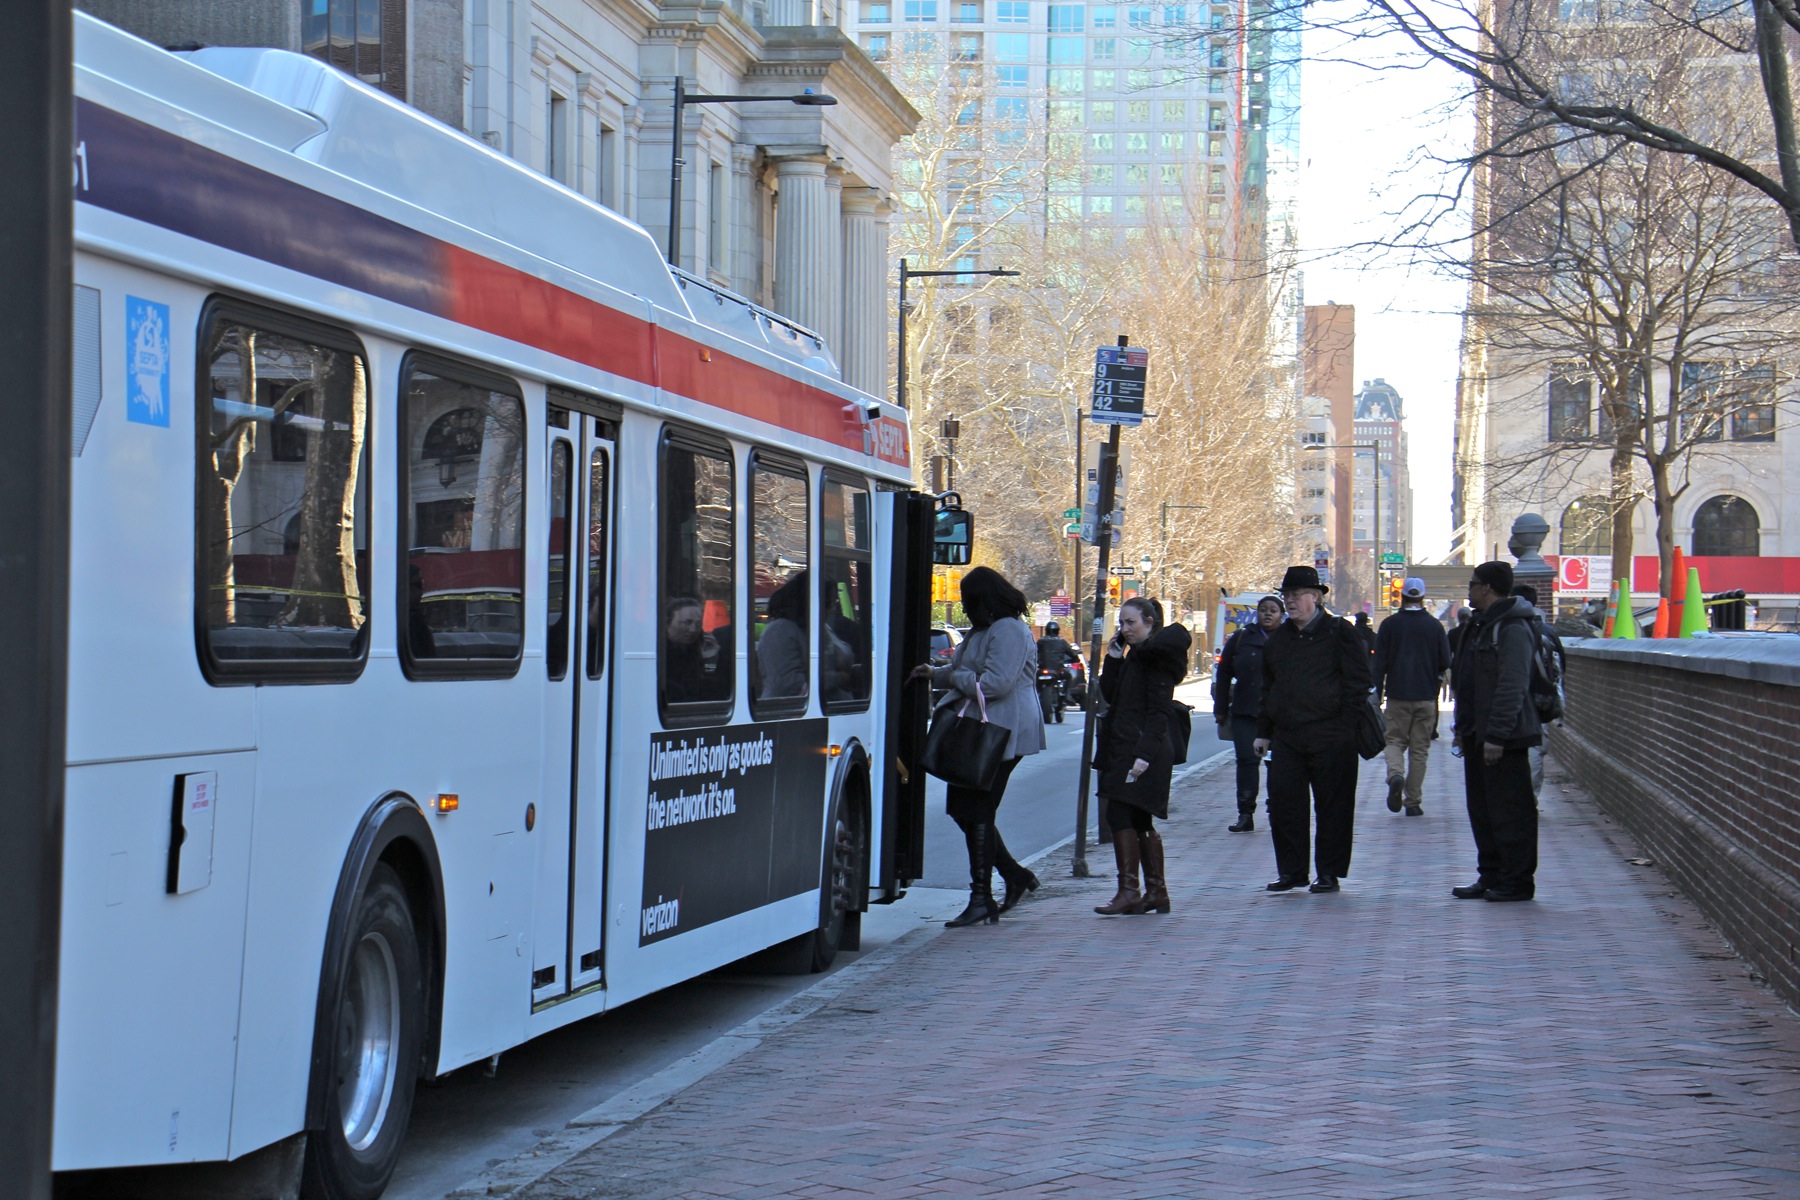 Passengers board the No. 9 bus at 6th and Walnut streets. (Emma Lee/WHYY)